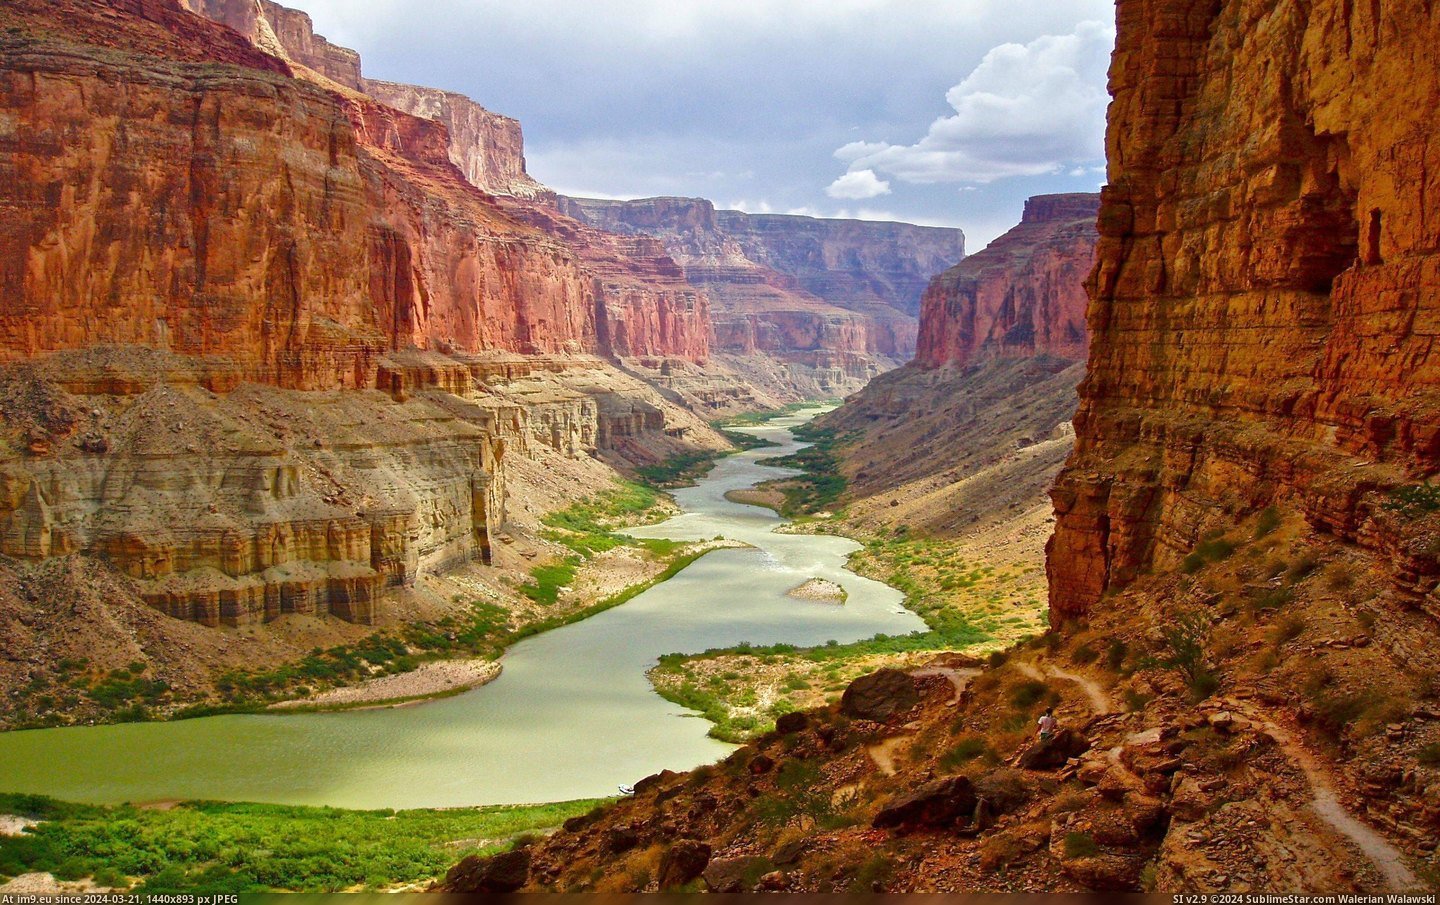 #Canyon #Sam #2560x1600 #Grand [Earthporn] Within the Grand Canyon, by Sam Barberie [2560x1600] Pic. (Изображение из альбом My r/EARTHPORN favs))